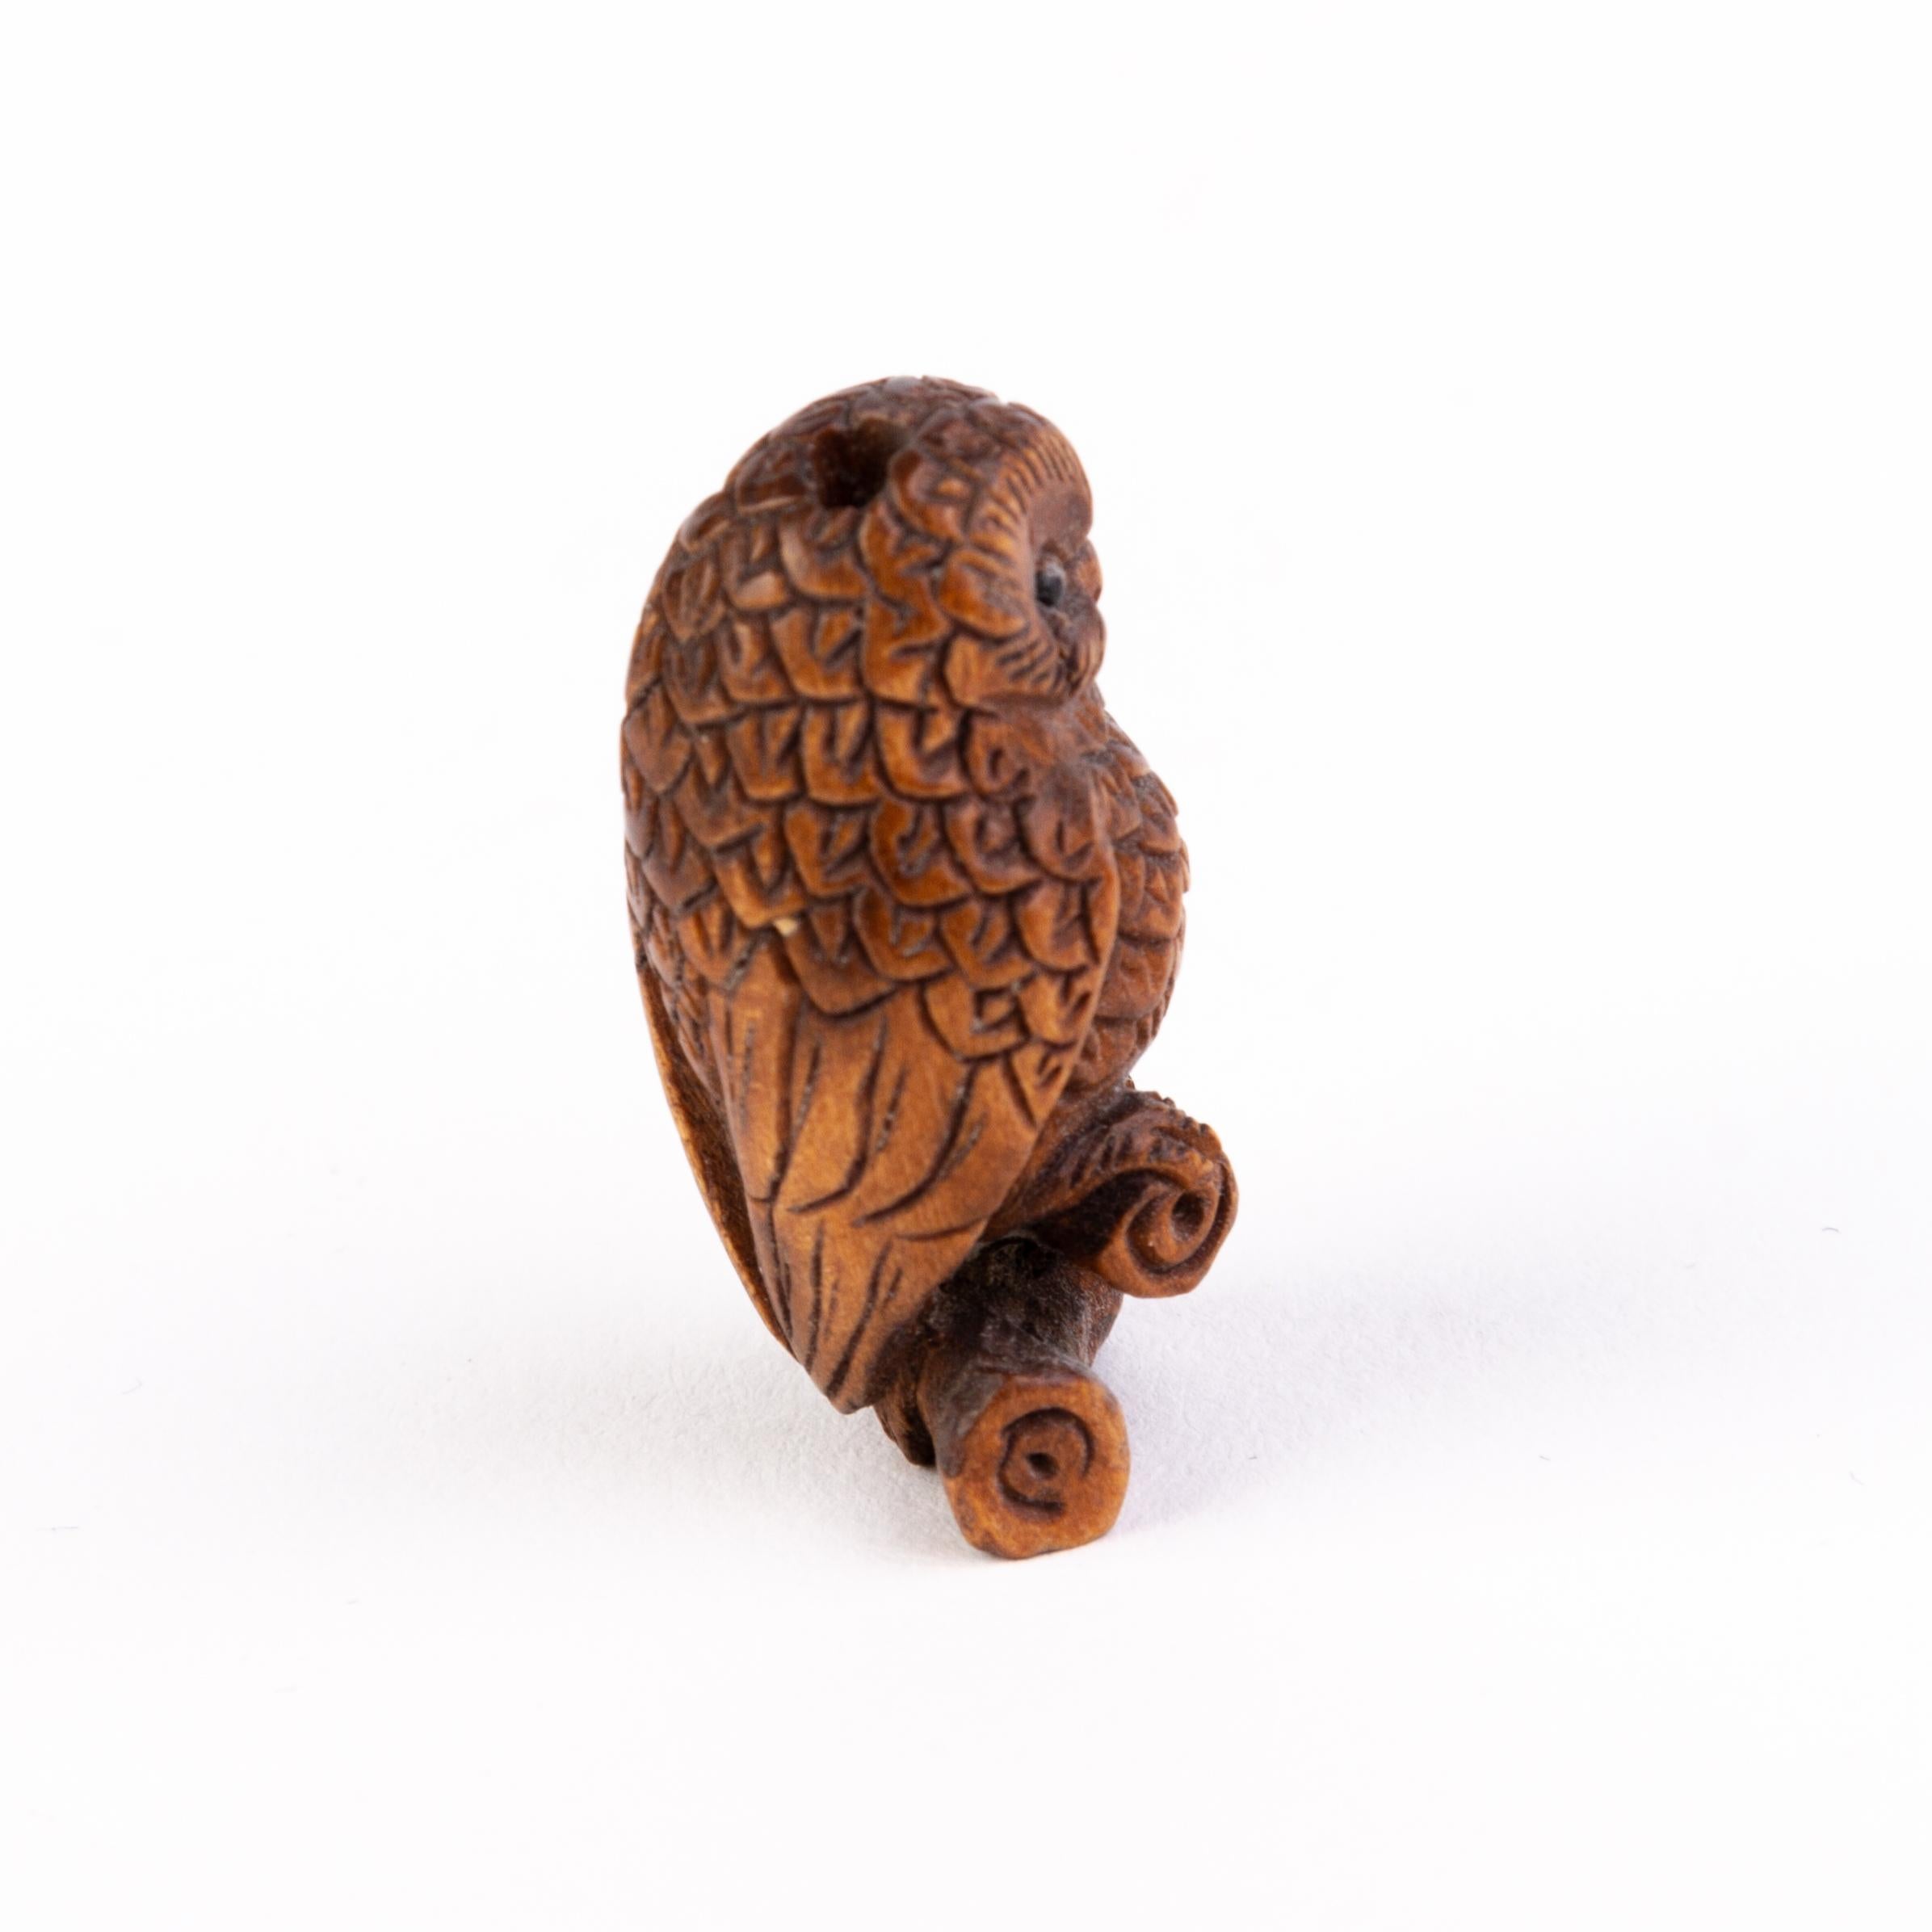 In good condition
From a private collection
Free international shipping
Signed Japanese Carved Wood Netsuke Inro Owl